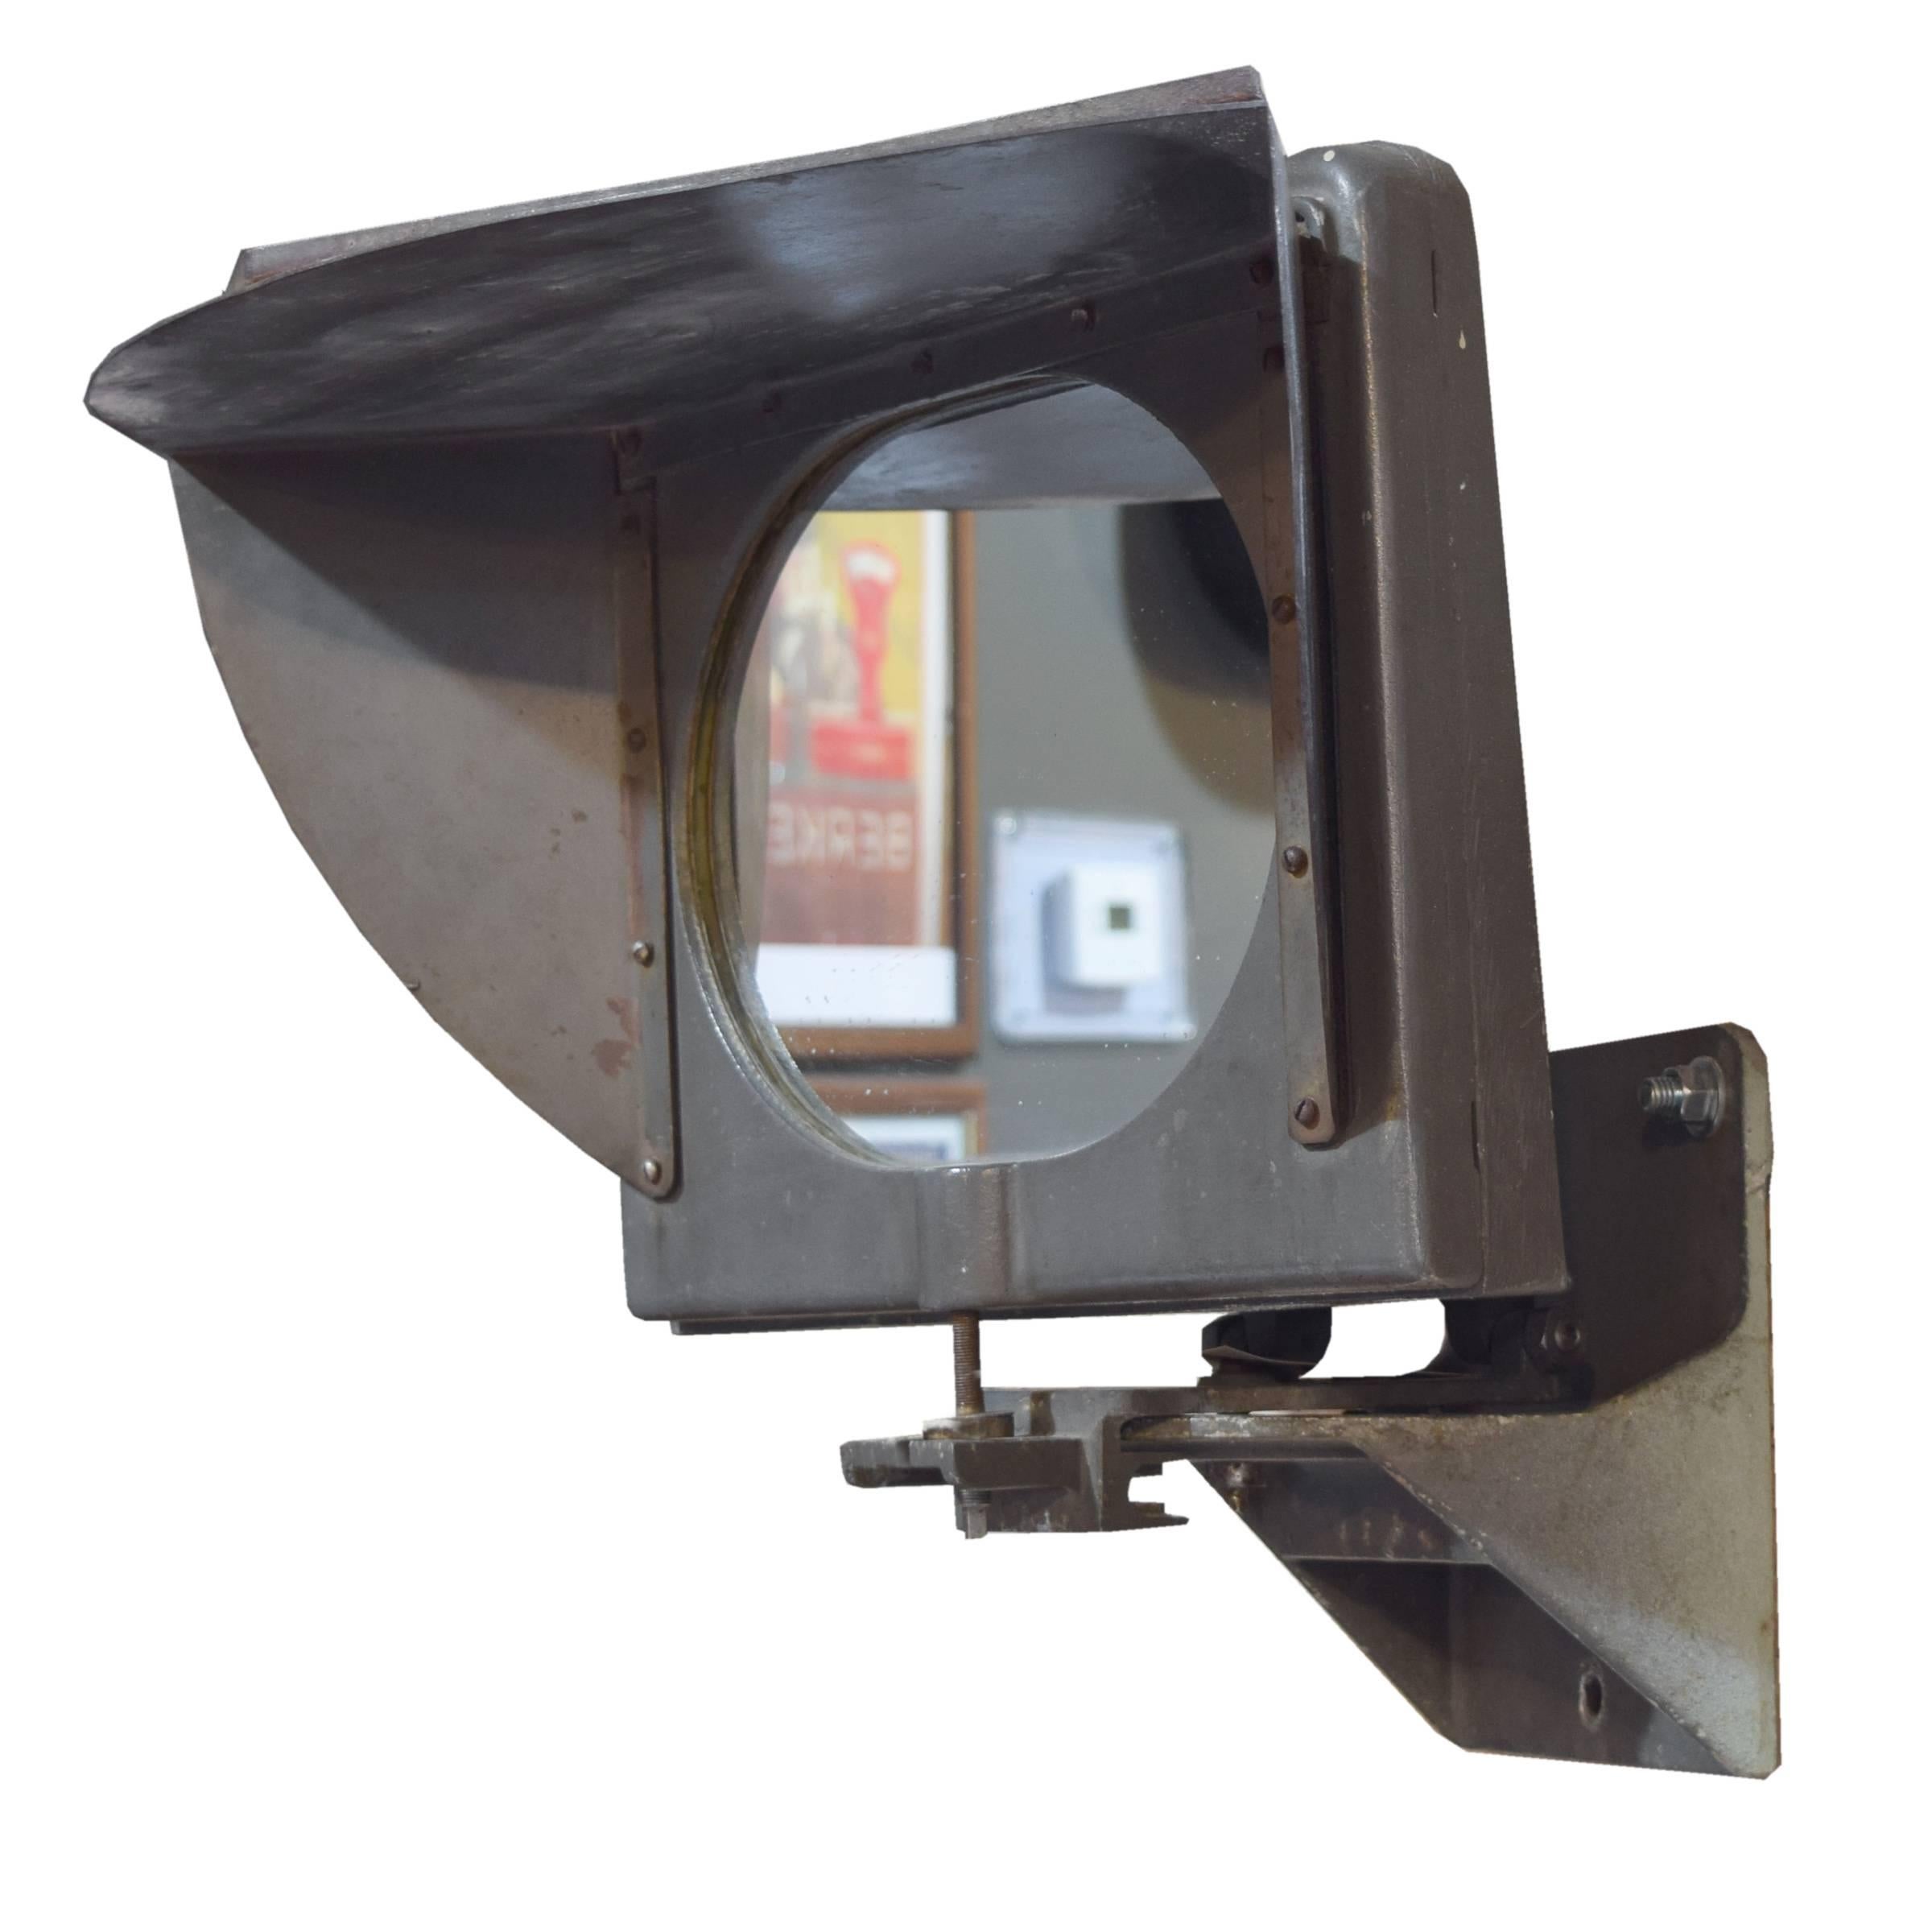 An American oval shaped mirror in an Industrial cast iron frame, base and visor that adjusts left and right.